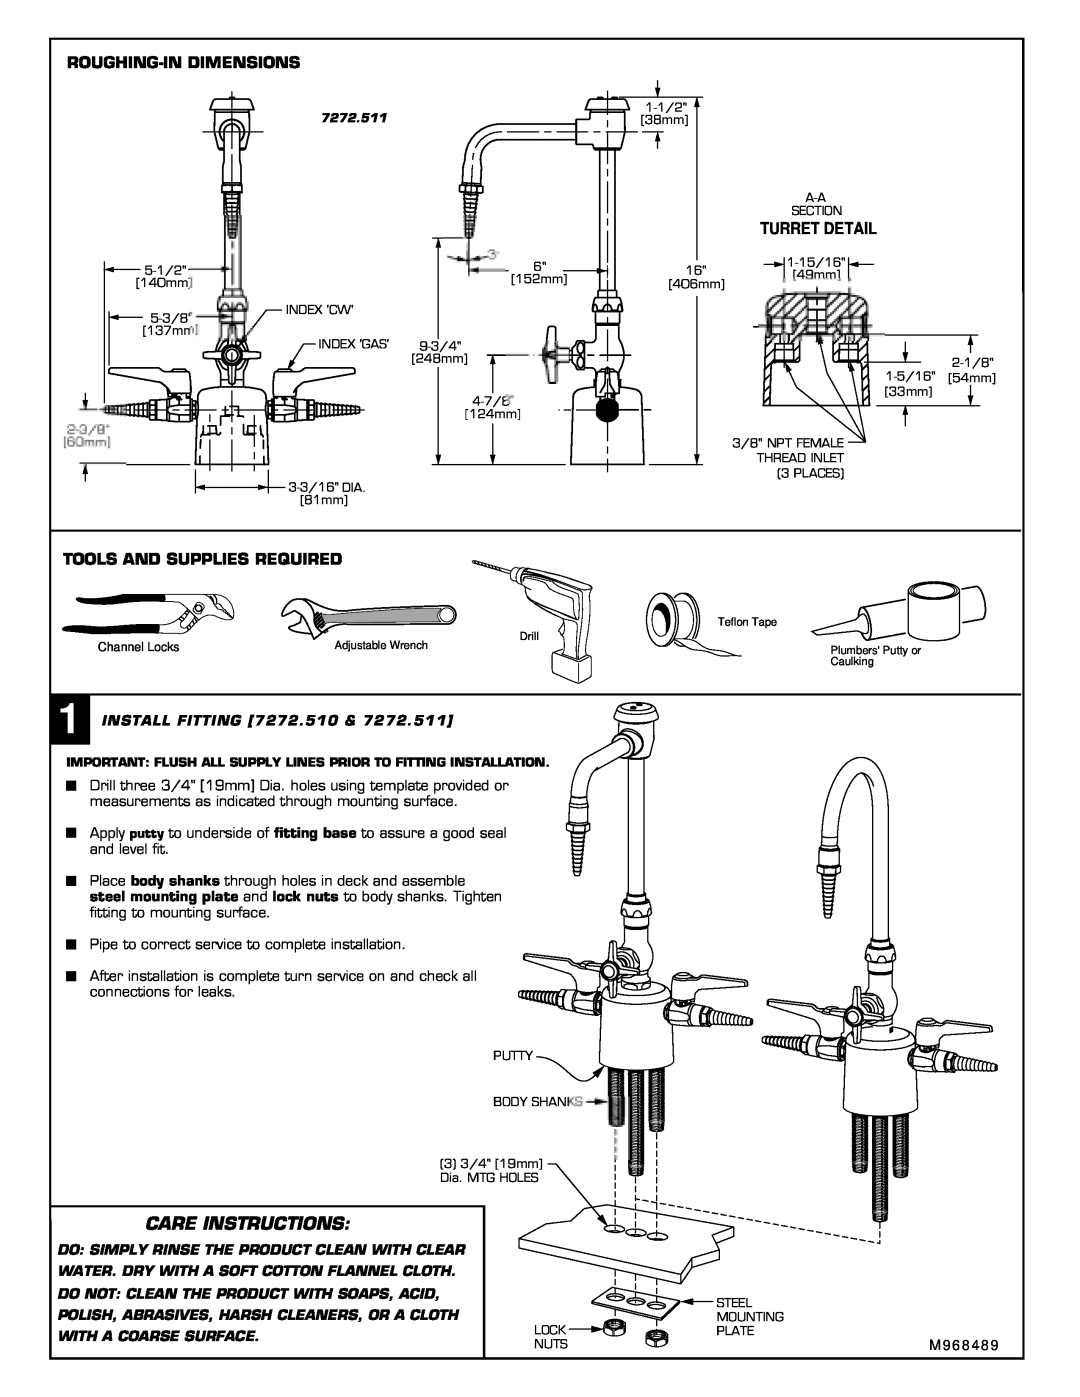 American Standard 7272.511, 7272.510 Care Instructions, Roughing-Indimensions, Turret Detail, Tools And Supplies Required 